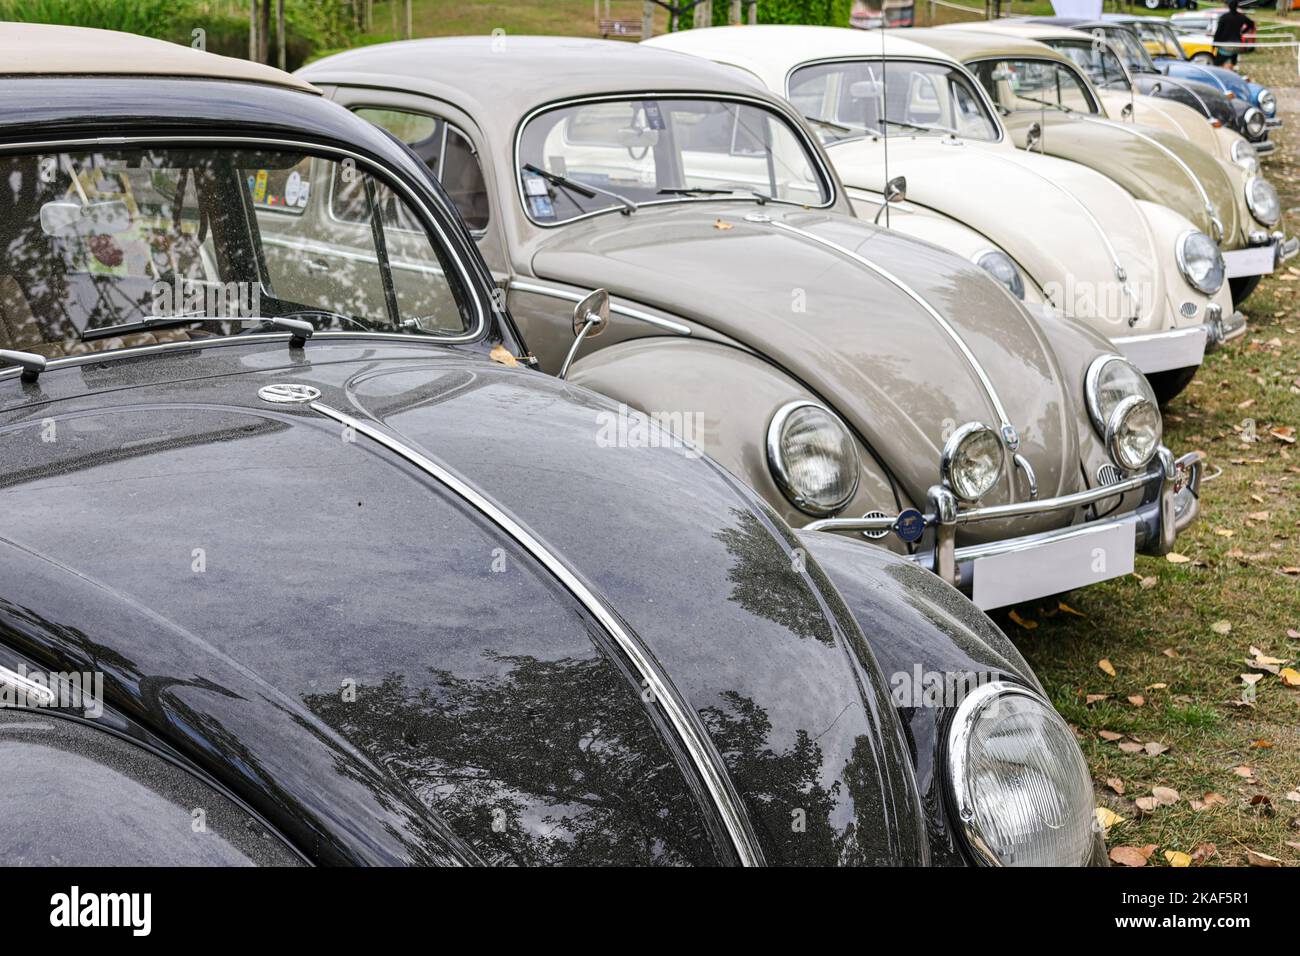 A row of various VW model Beetle (Kafer) cars during an exhibition in a park Stock Photo